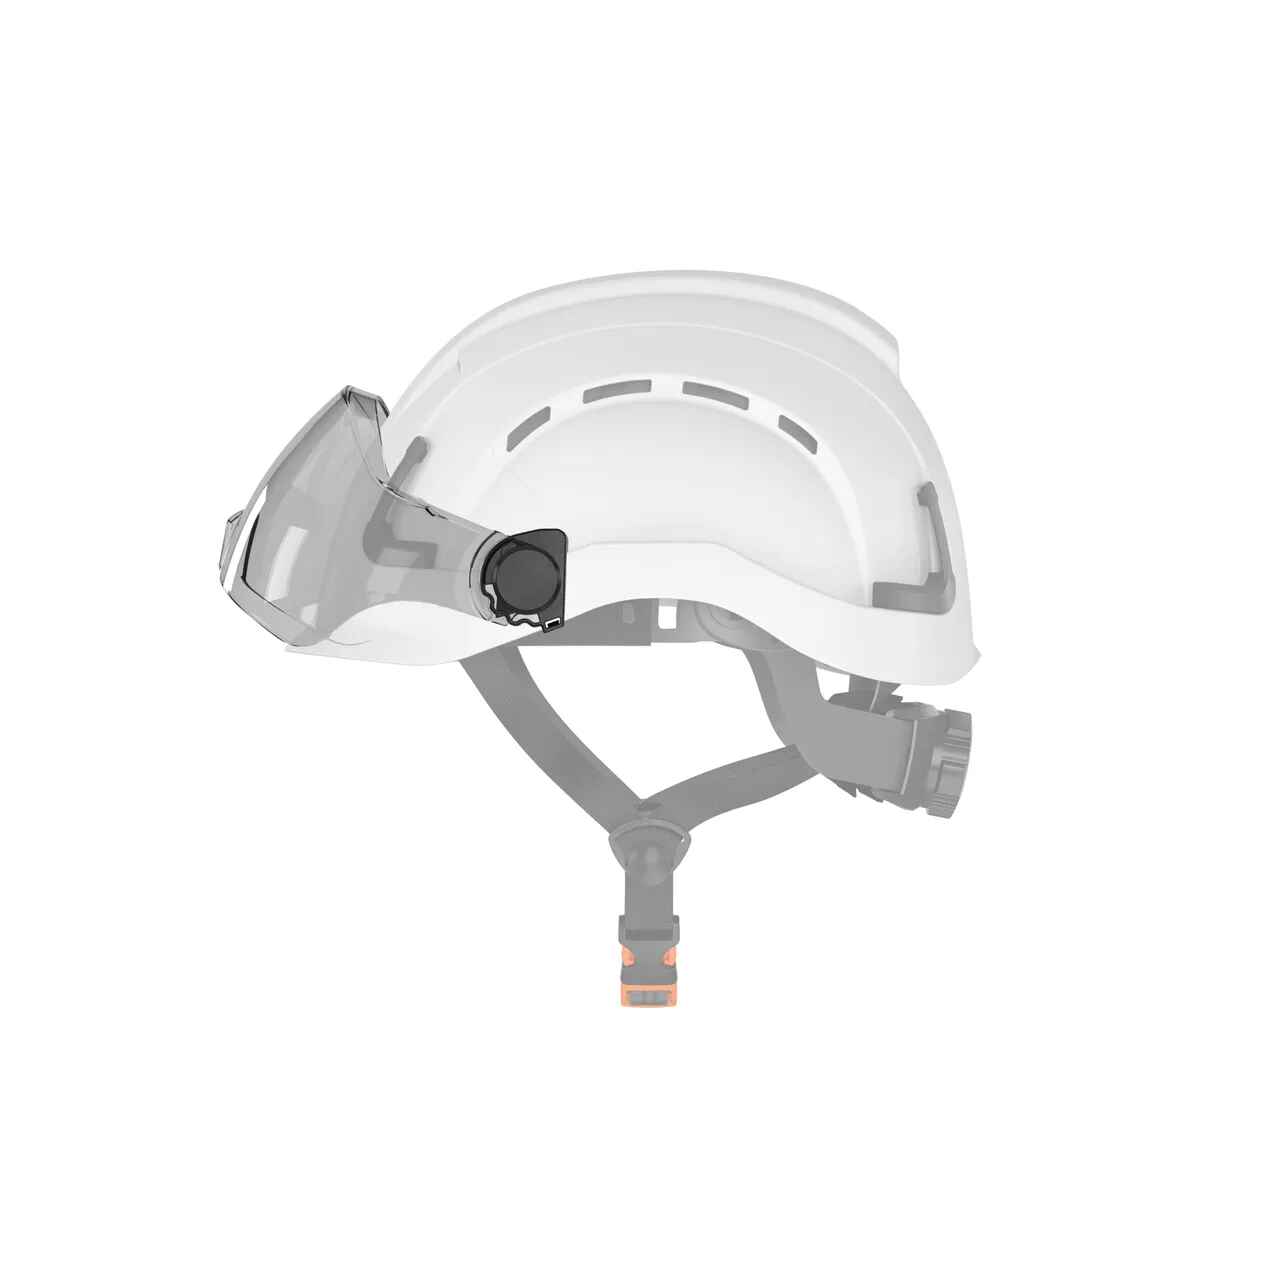 H2 Visor (TINTED), ANSI Z87+ Rated, Anti-fog and Anti-Scratch - Defender Safety